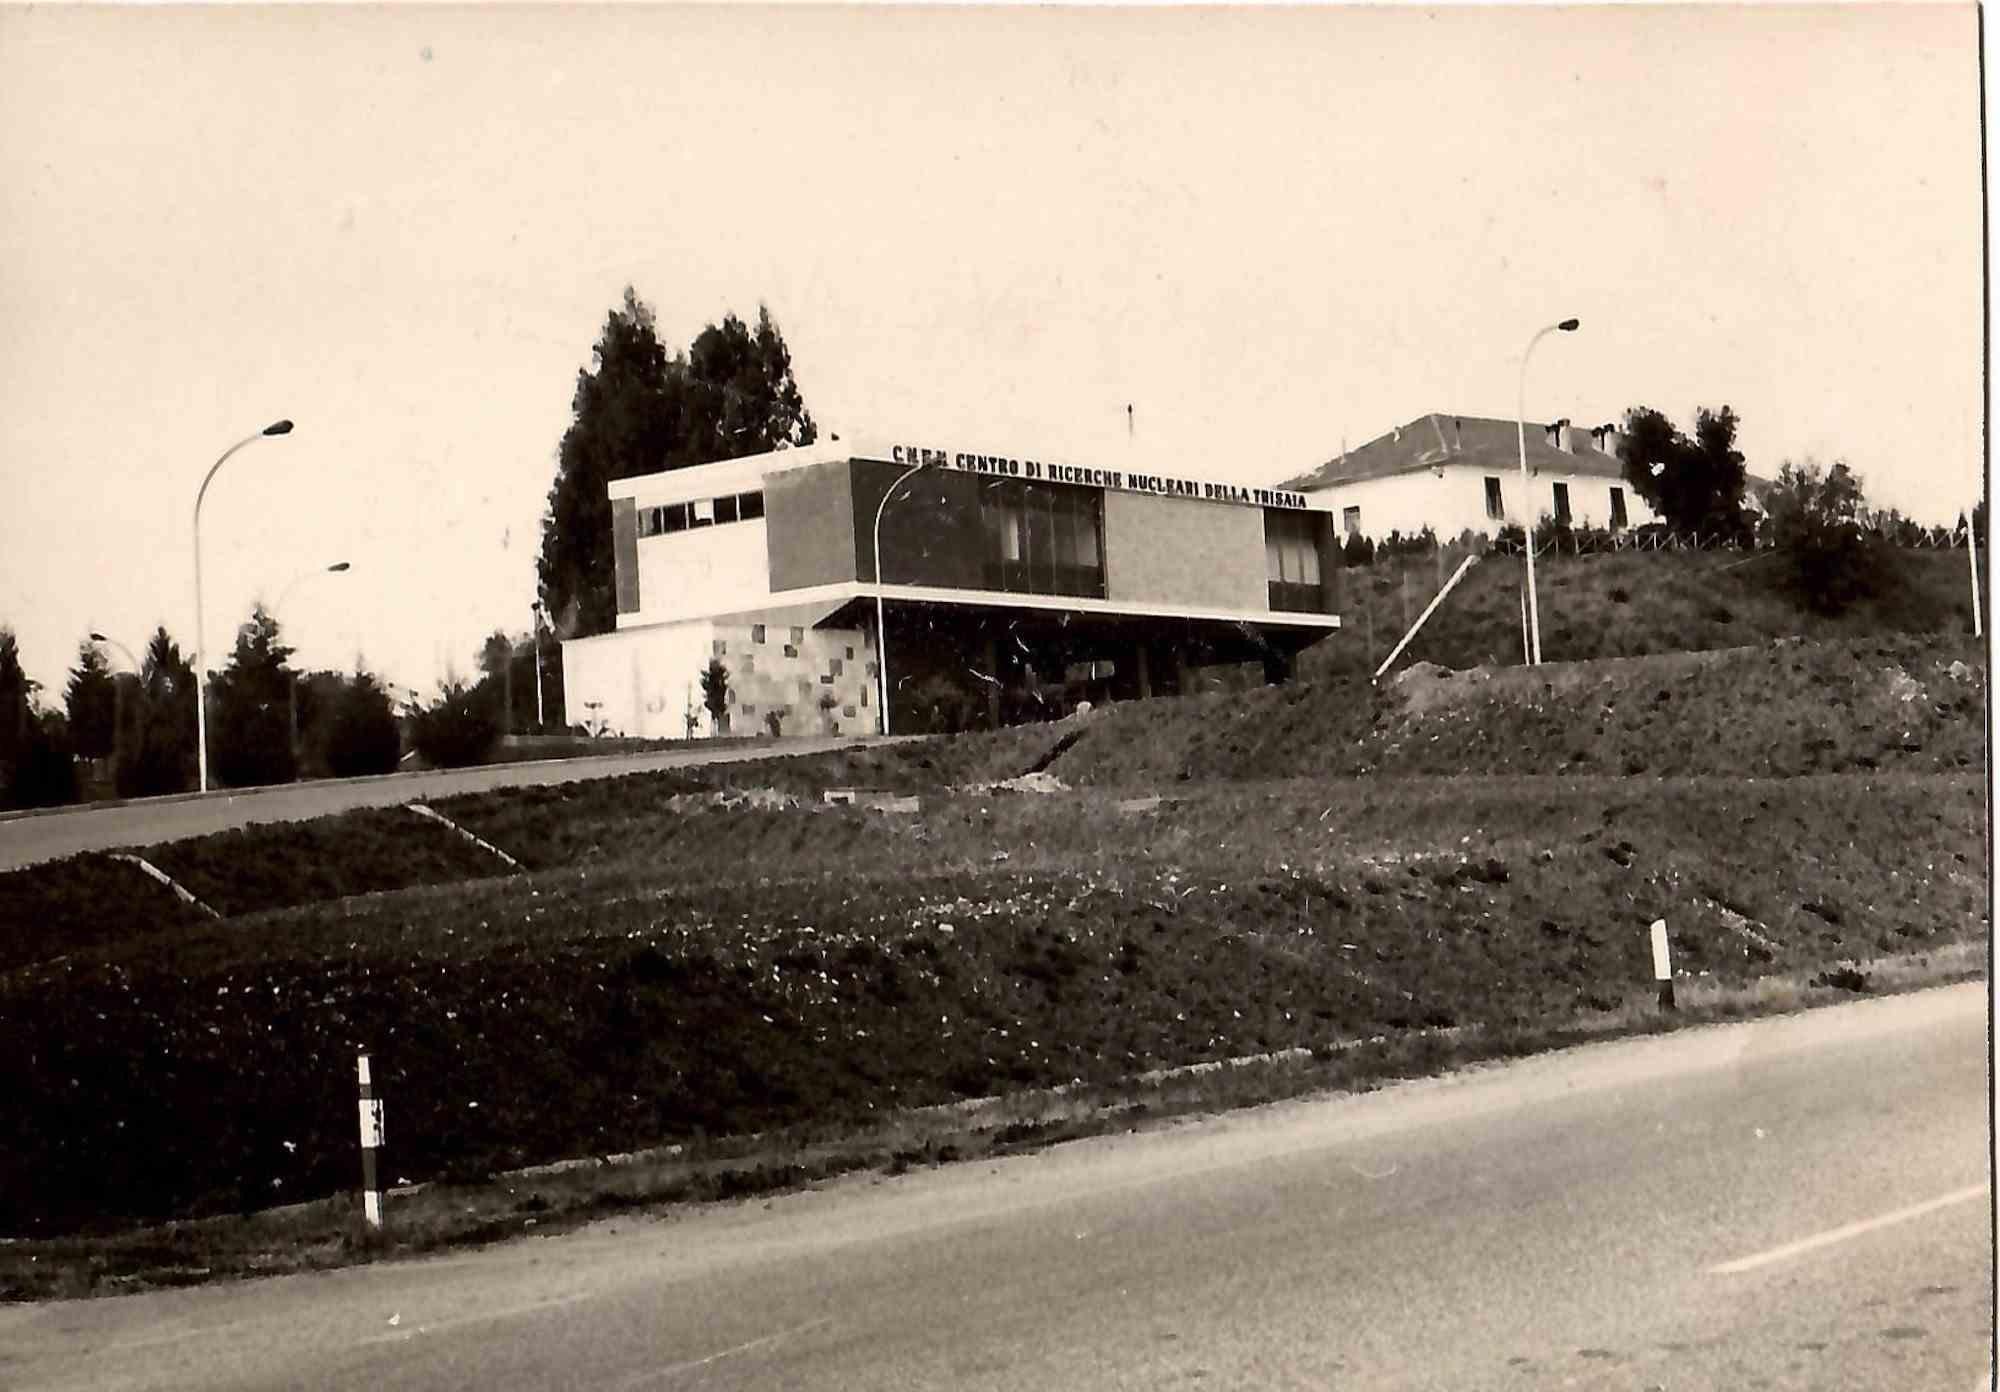 CNEN Nuclear Research Center of the Trisaia - Vintage B/W photo - 1970s - Photograph by Unknown